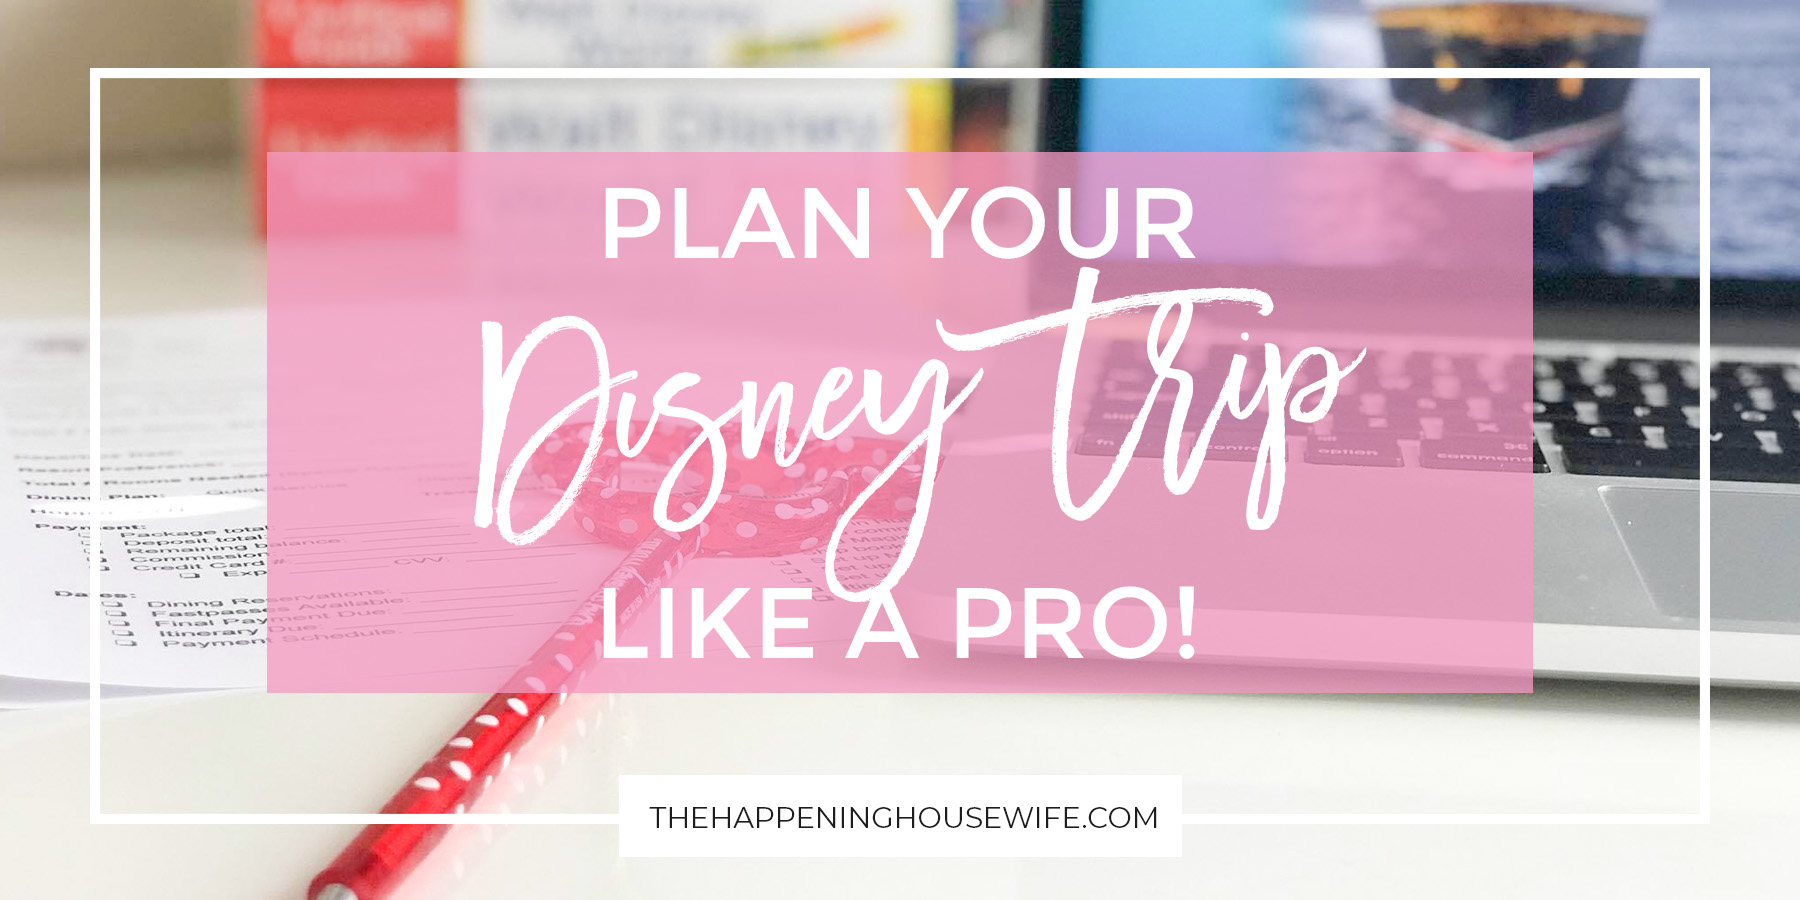 Plan your Disney trip like a pro! All the tips and tricks you need to have the best Disney vacation ever! #disneytips #disneyvacation #disneyworld #disneytripadvice